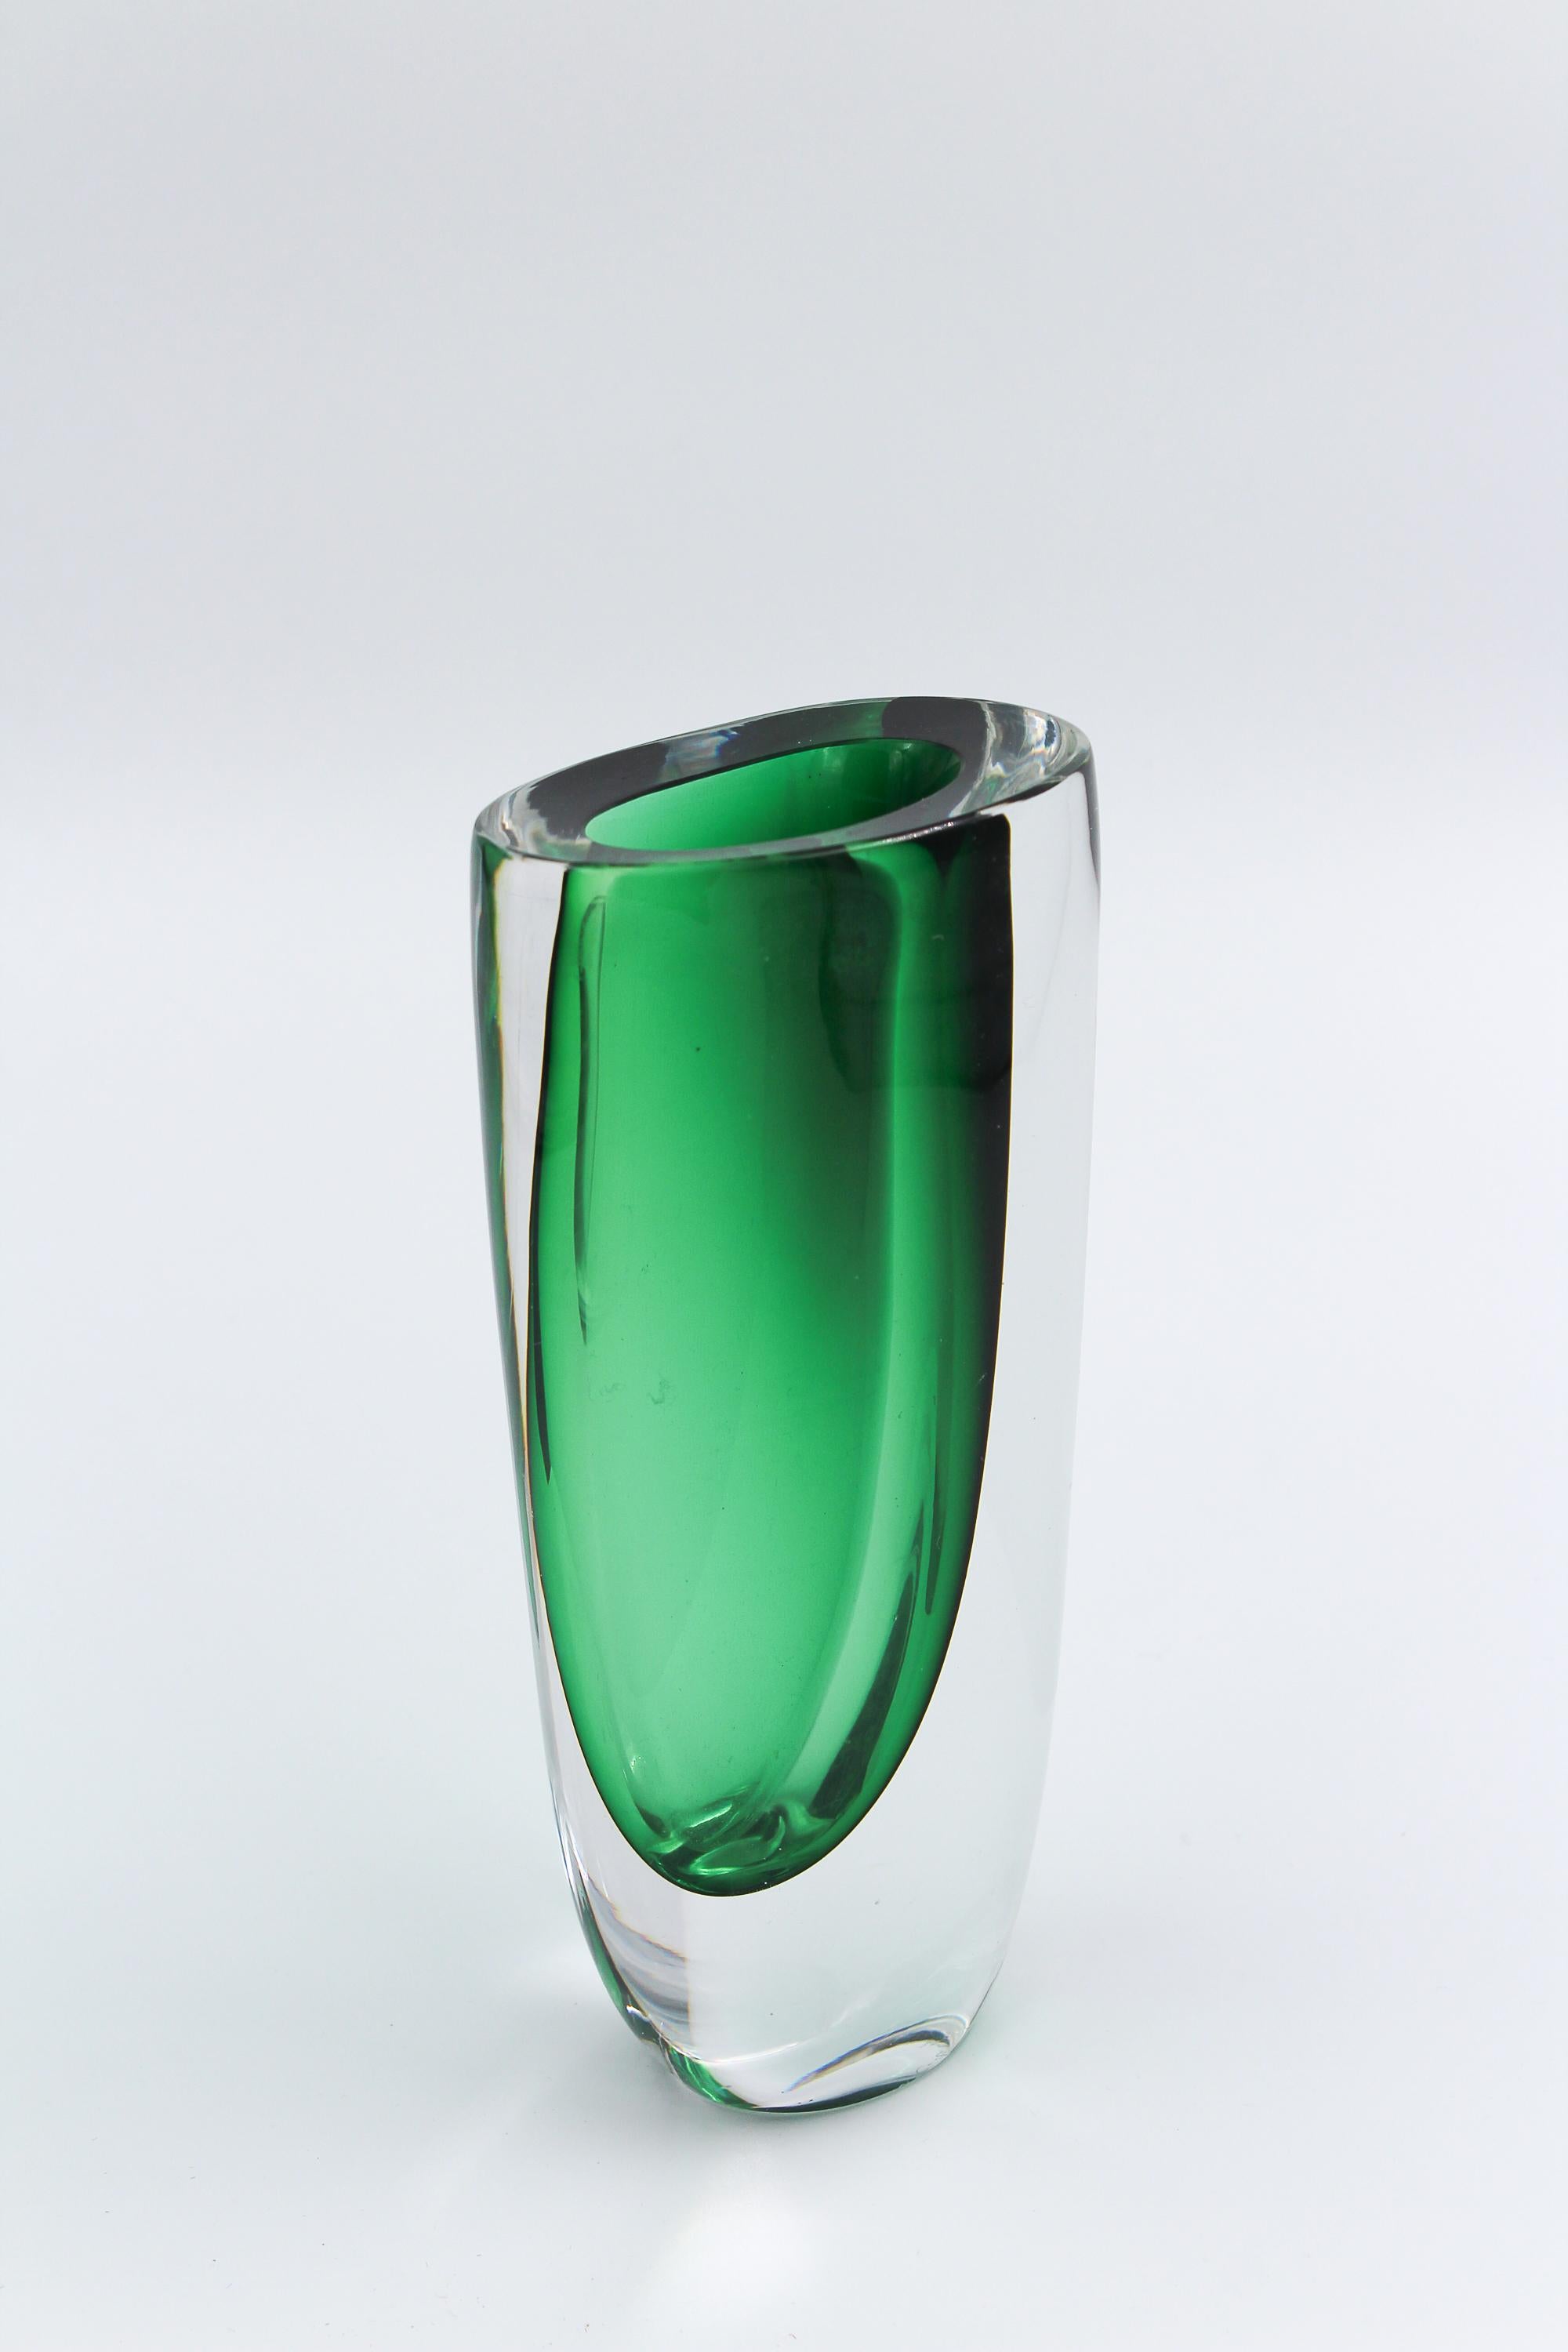 A very decorative midcentury glass vase by Swedish designer Vicke Lindstrand for Kosta. Very good vintage condition.